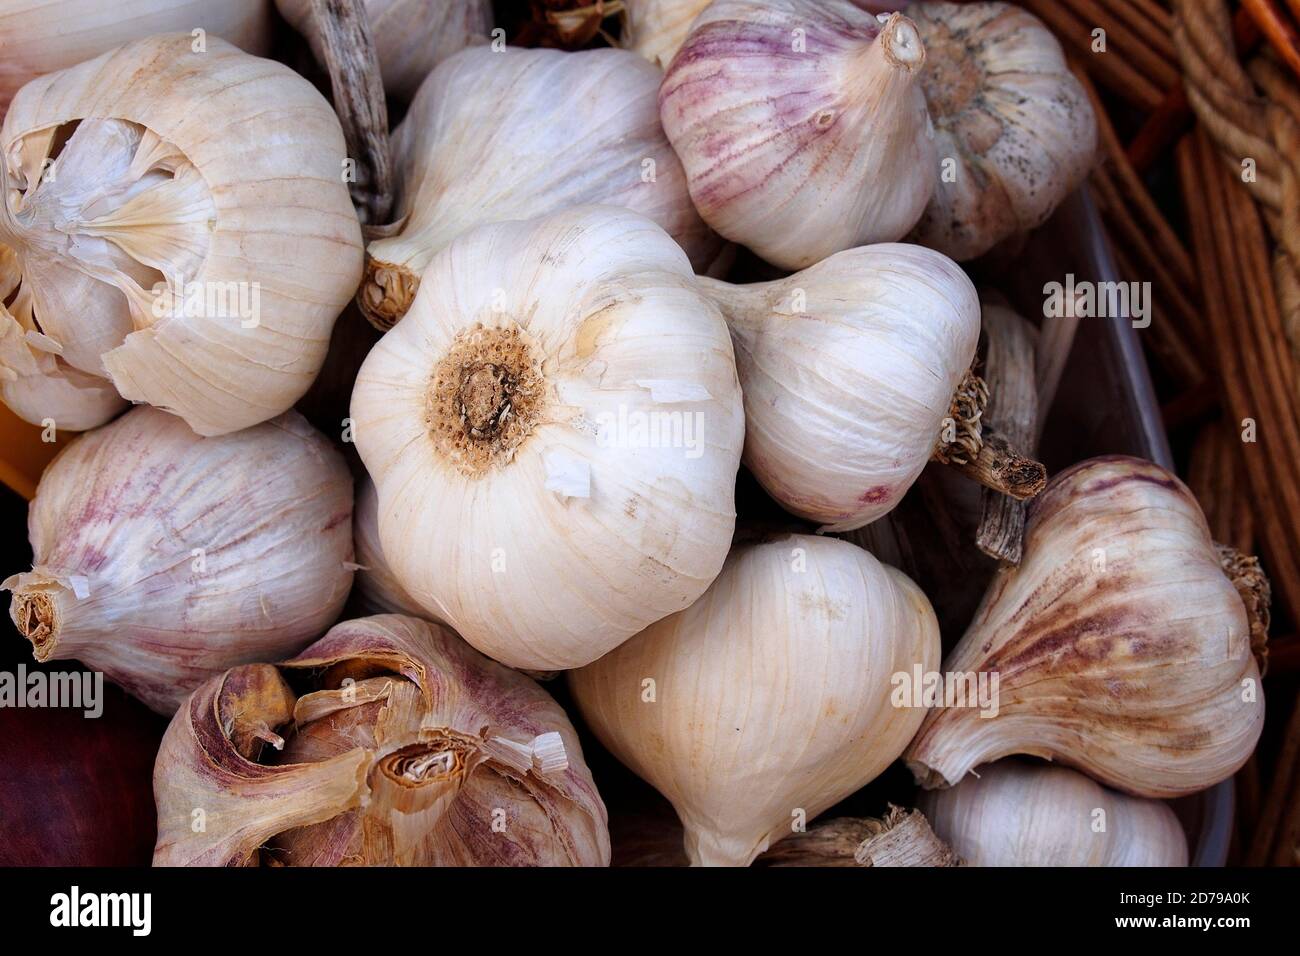 pile of garlic heads for sale in an outdoor food market Stock Photo